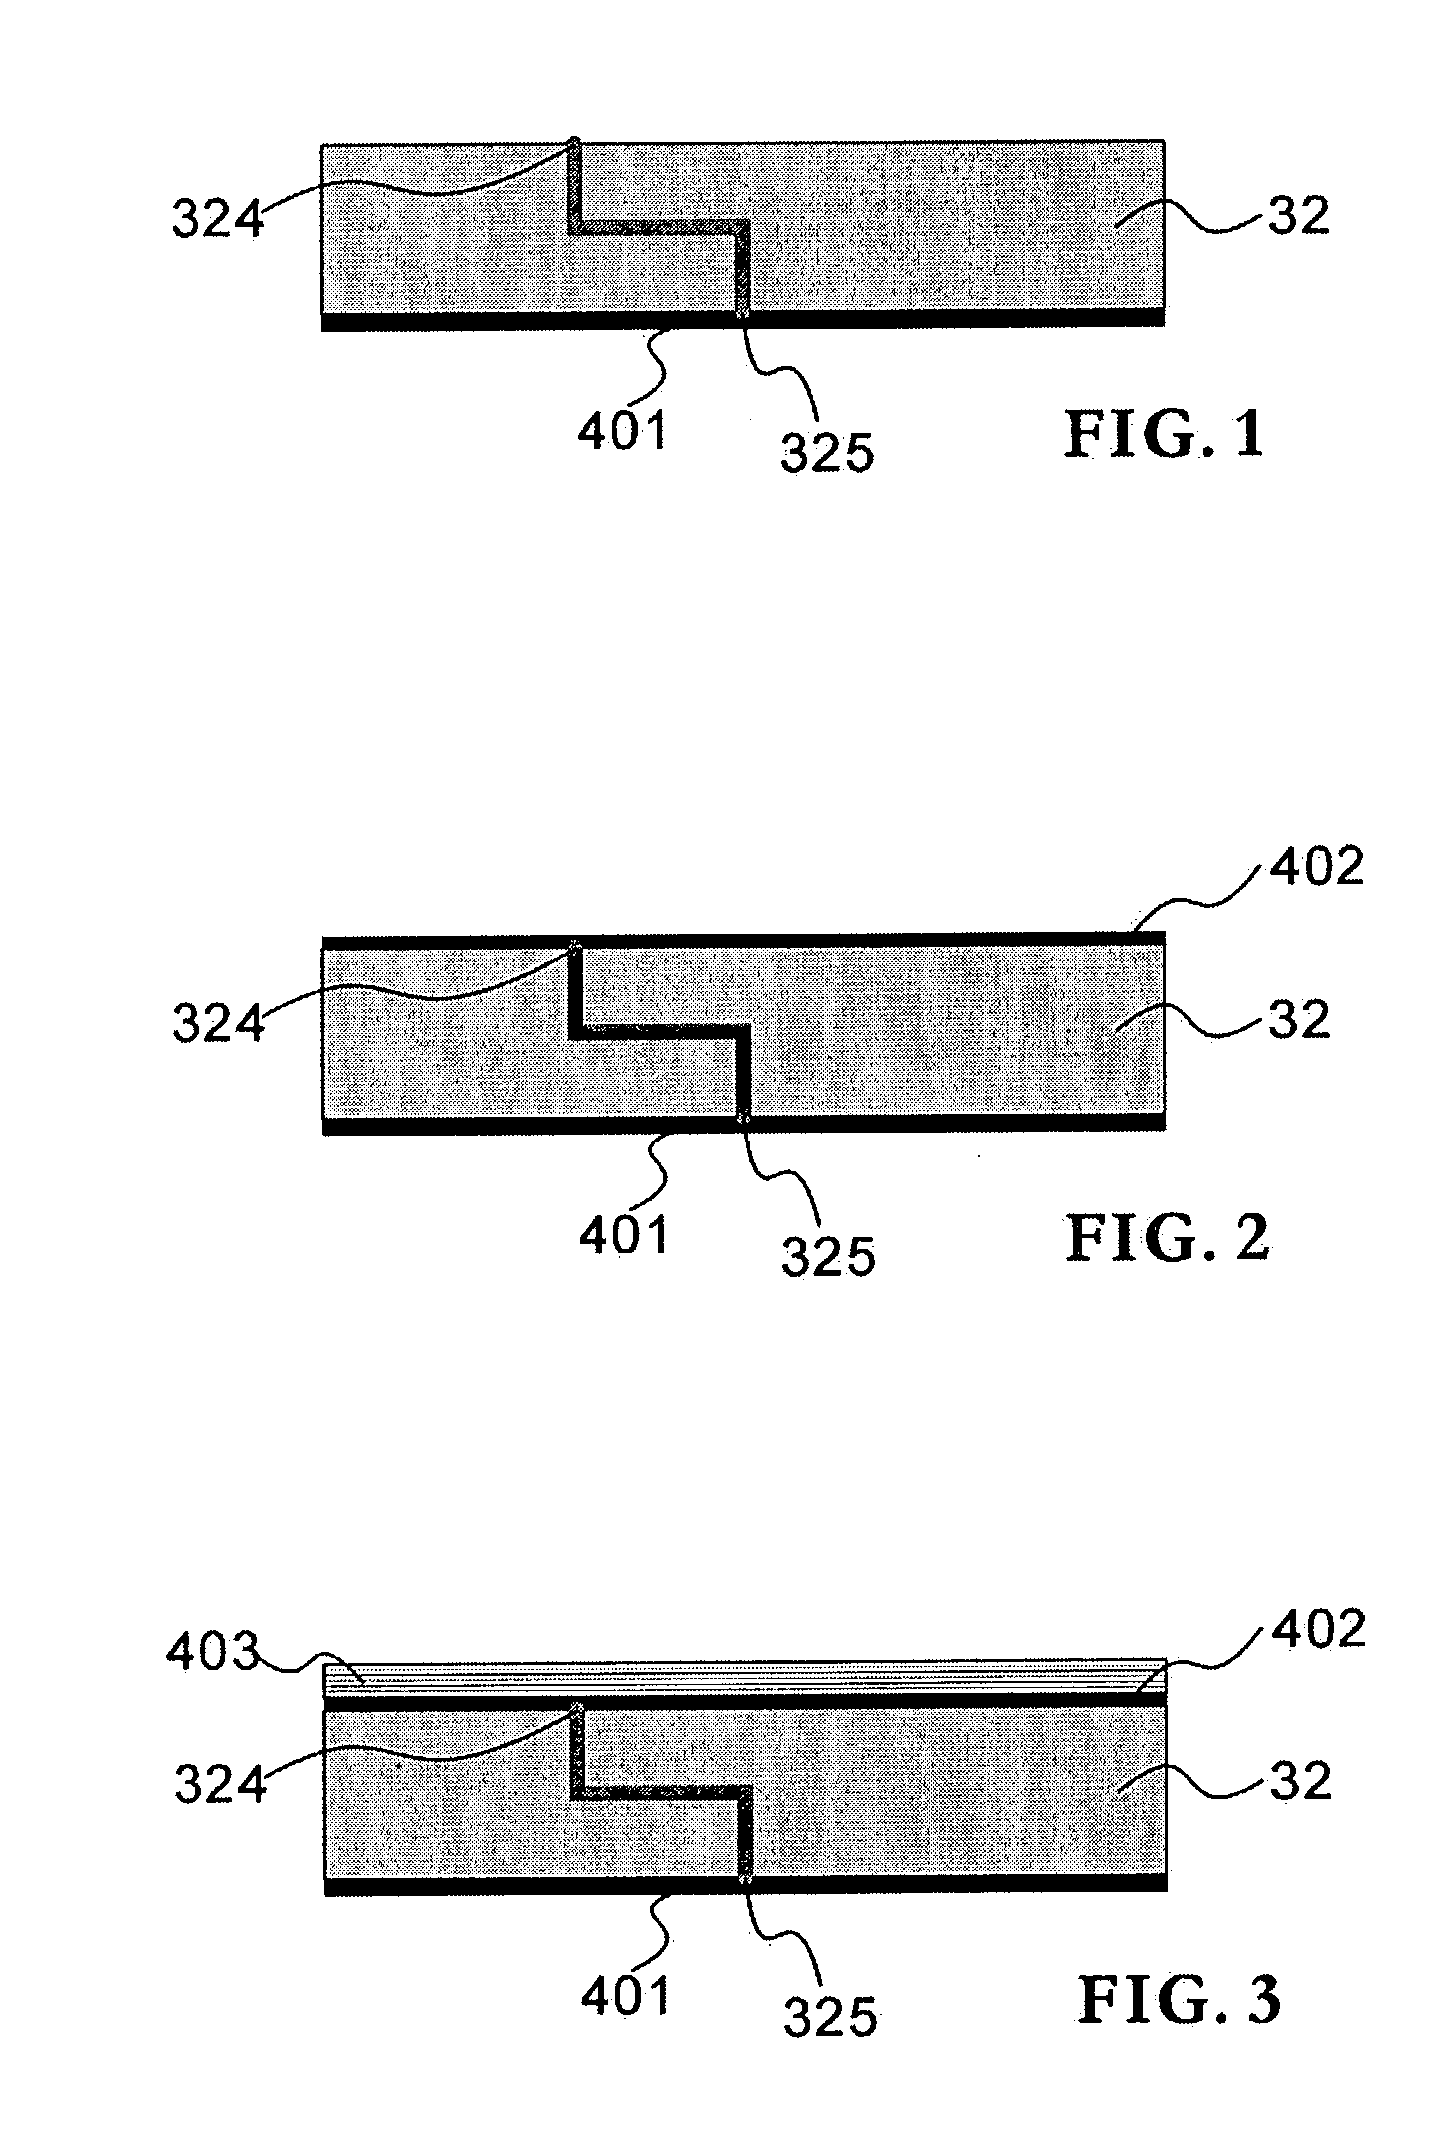 Method for producing micro probe tips